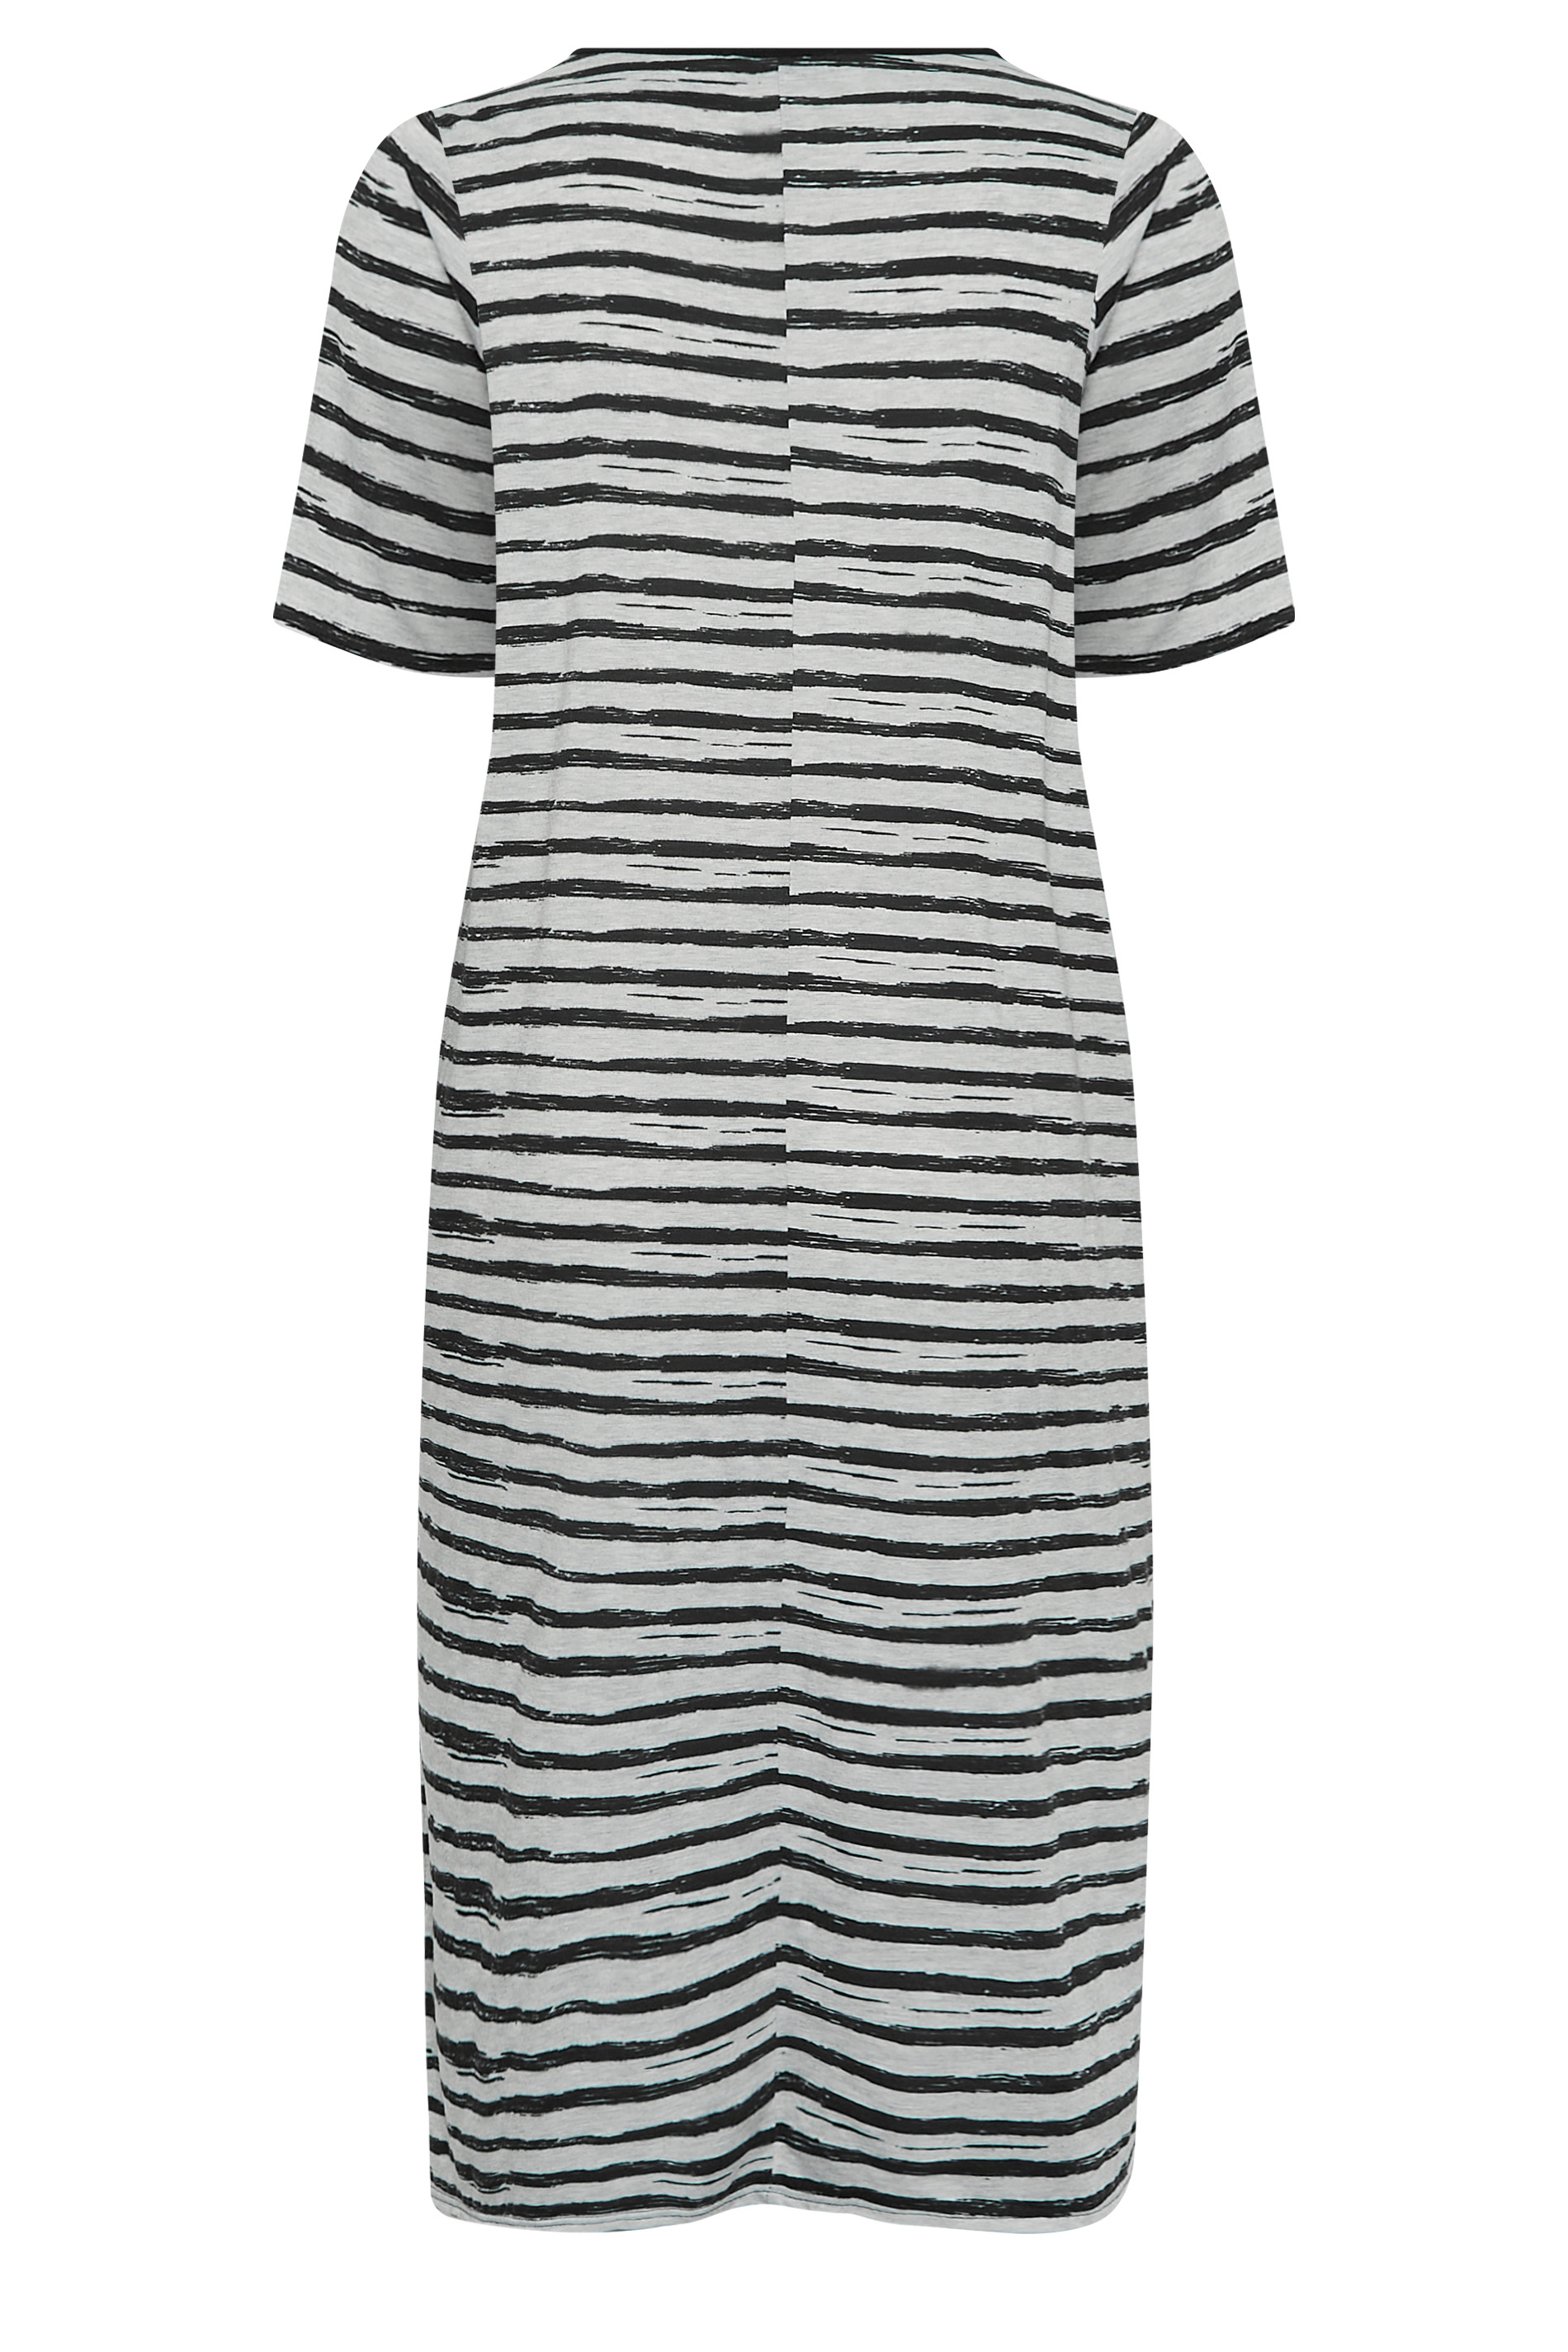 YOURS Plus Size Grey Stripe Print Maxi T-Shirt Dress | Yours Clothing